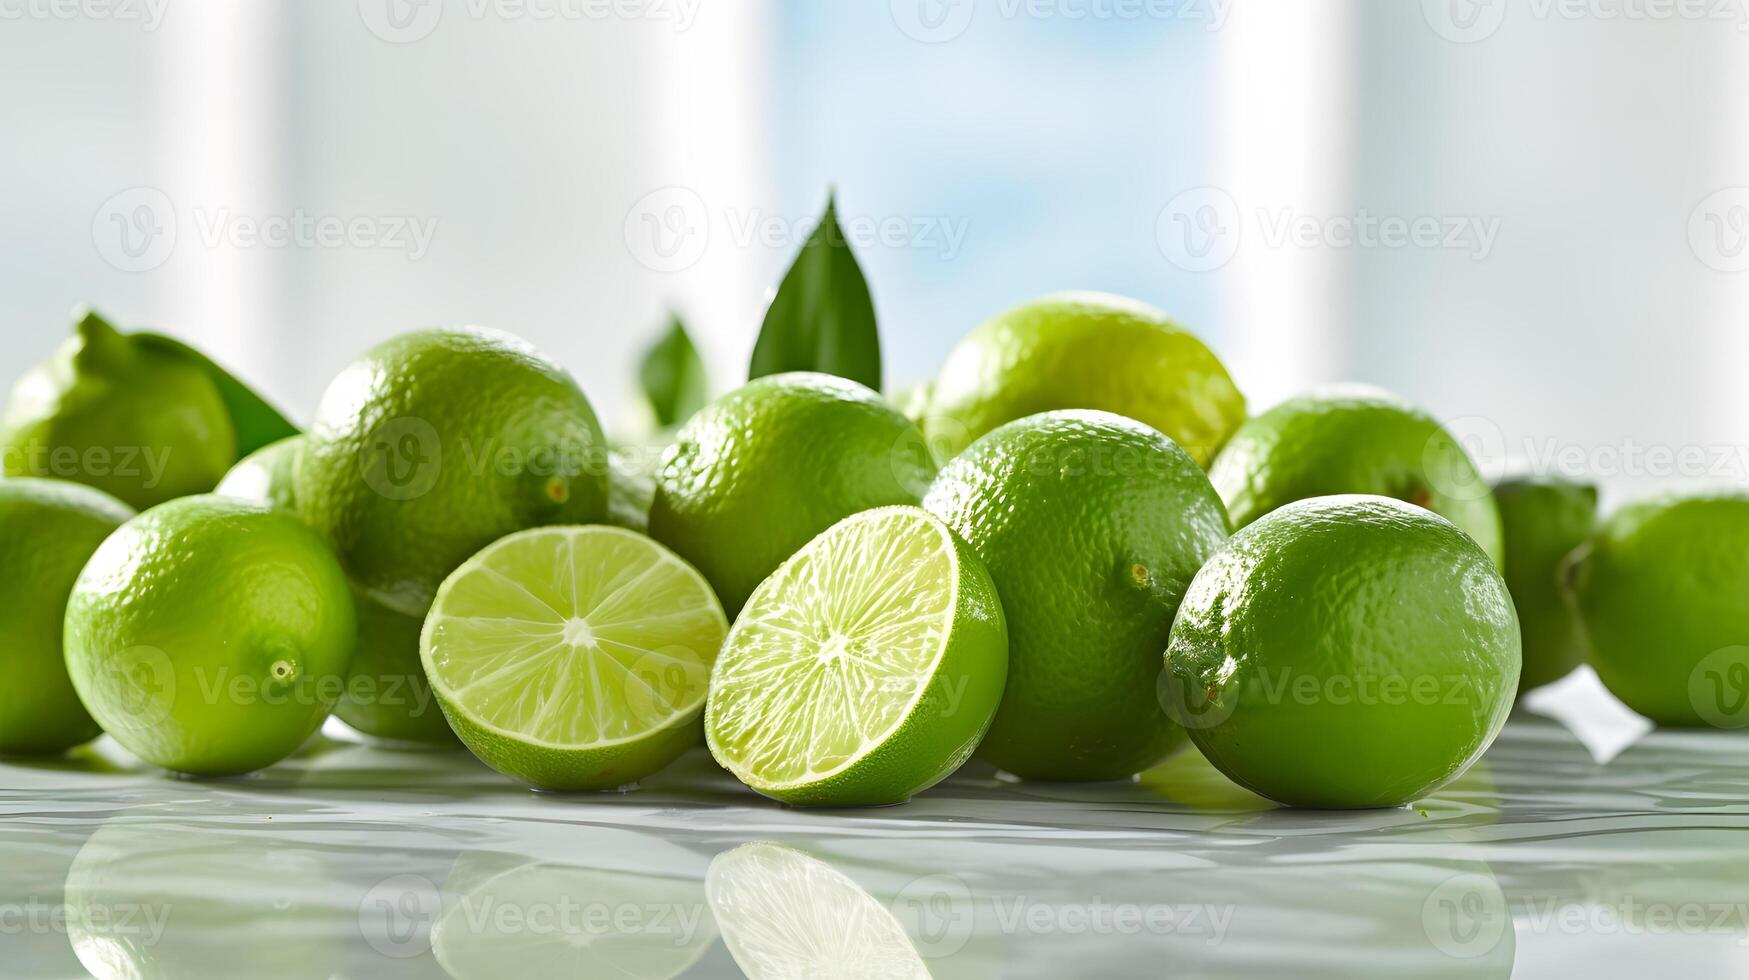 Lots of fresh limes. Neural network photo